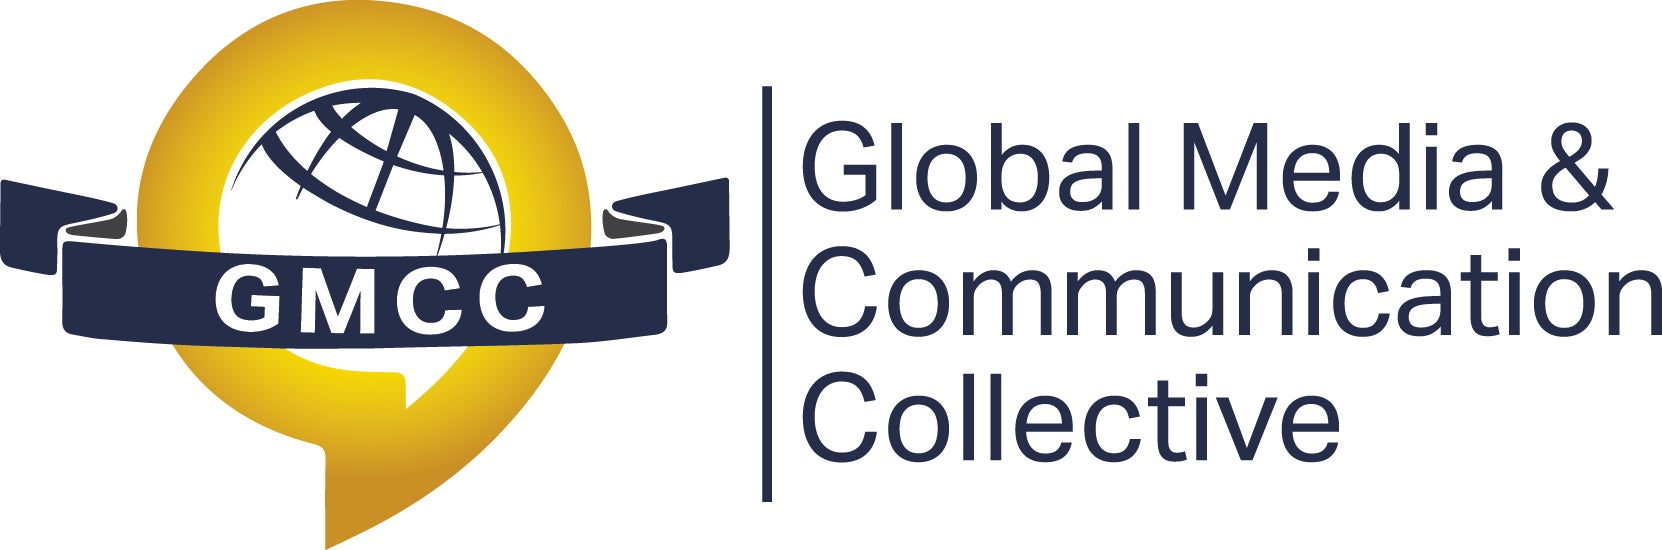 Global Media & Communication Collective